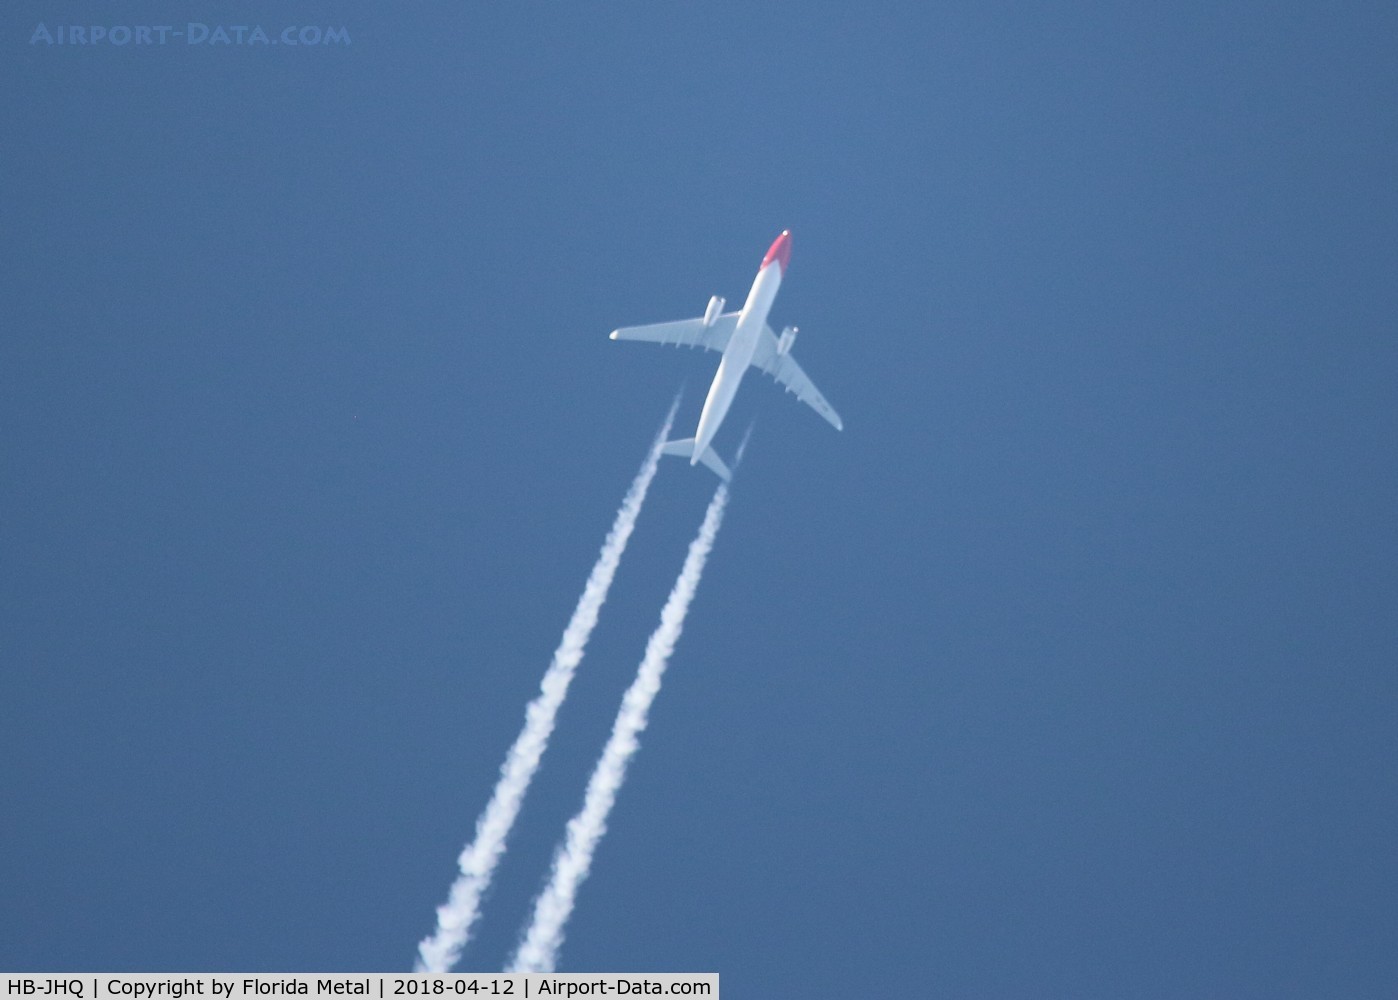 HB-JHQ, 2010 Airbus A330-343X C/N 1193, Swiss A333 zx in flight over Lakeland Florida from Zurich to Havana